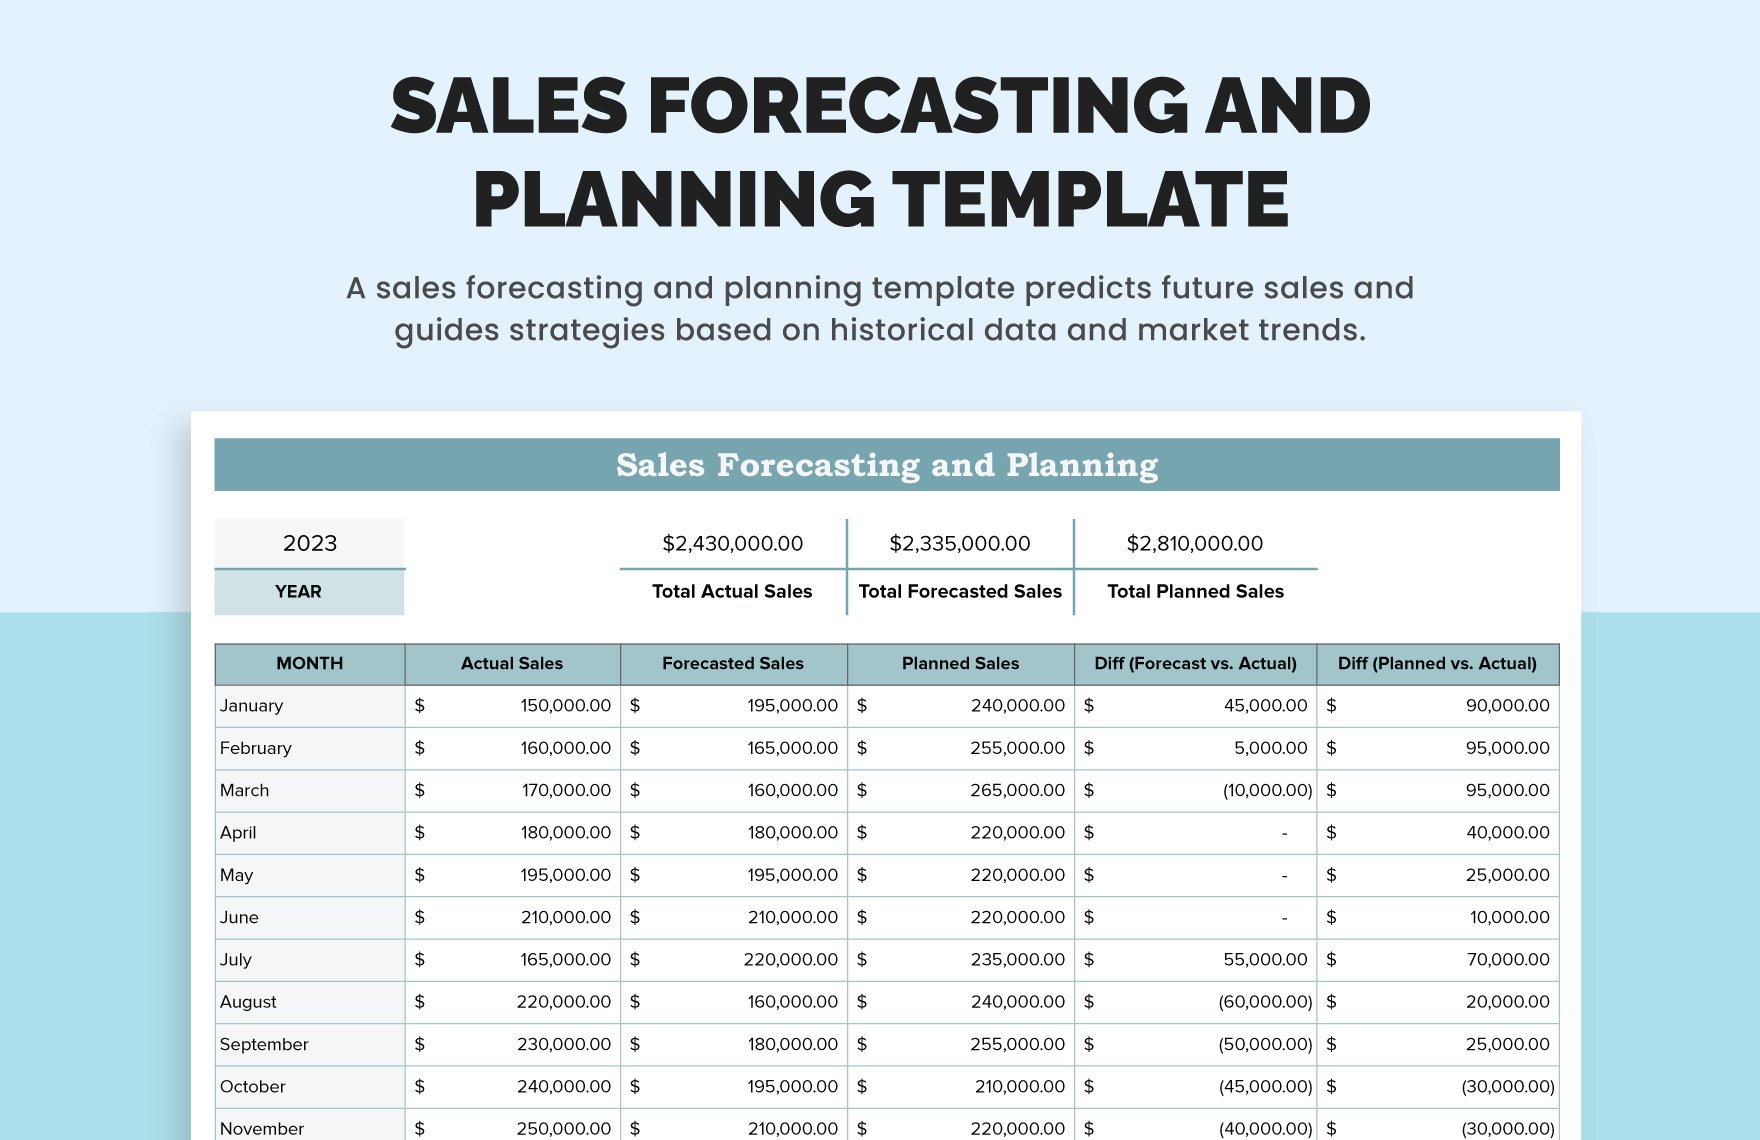 Sales Forecasting and Planning Template